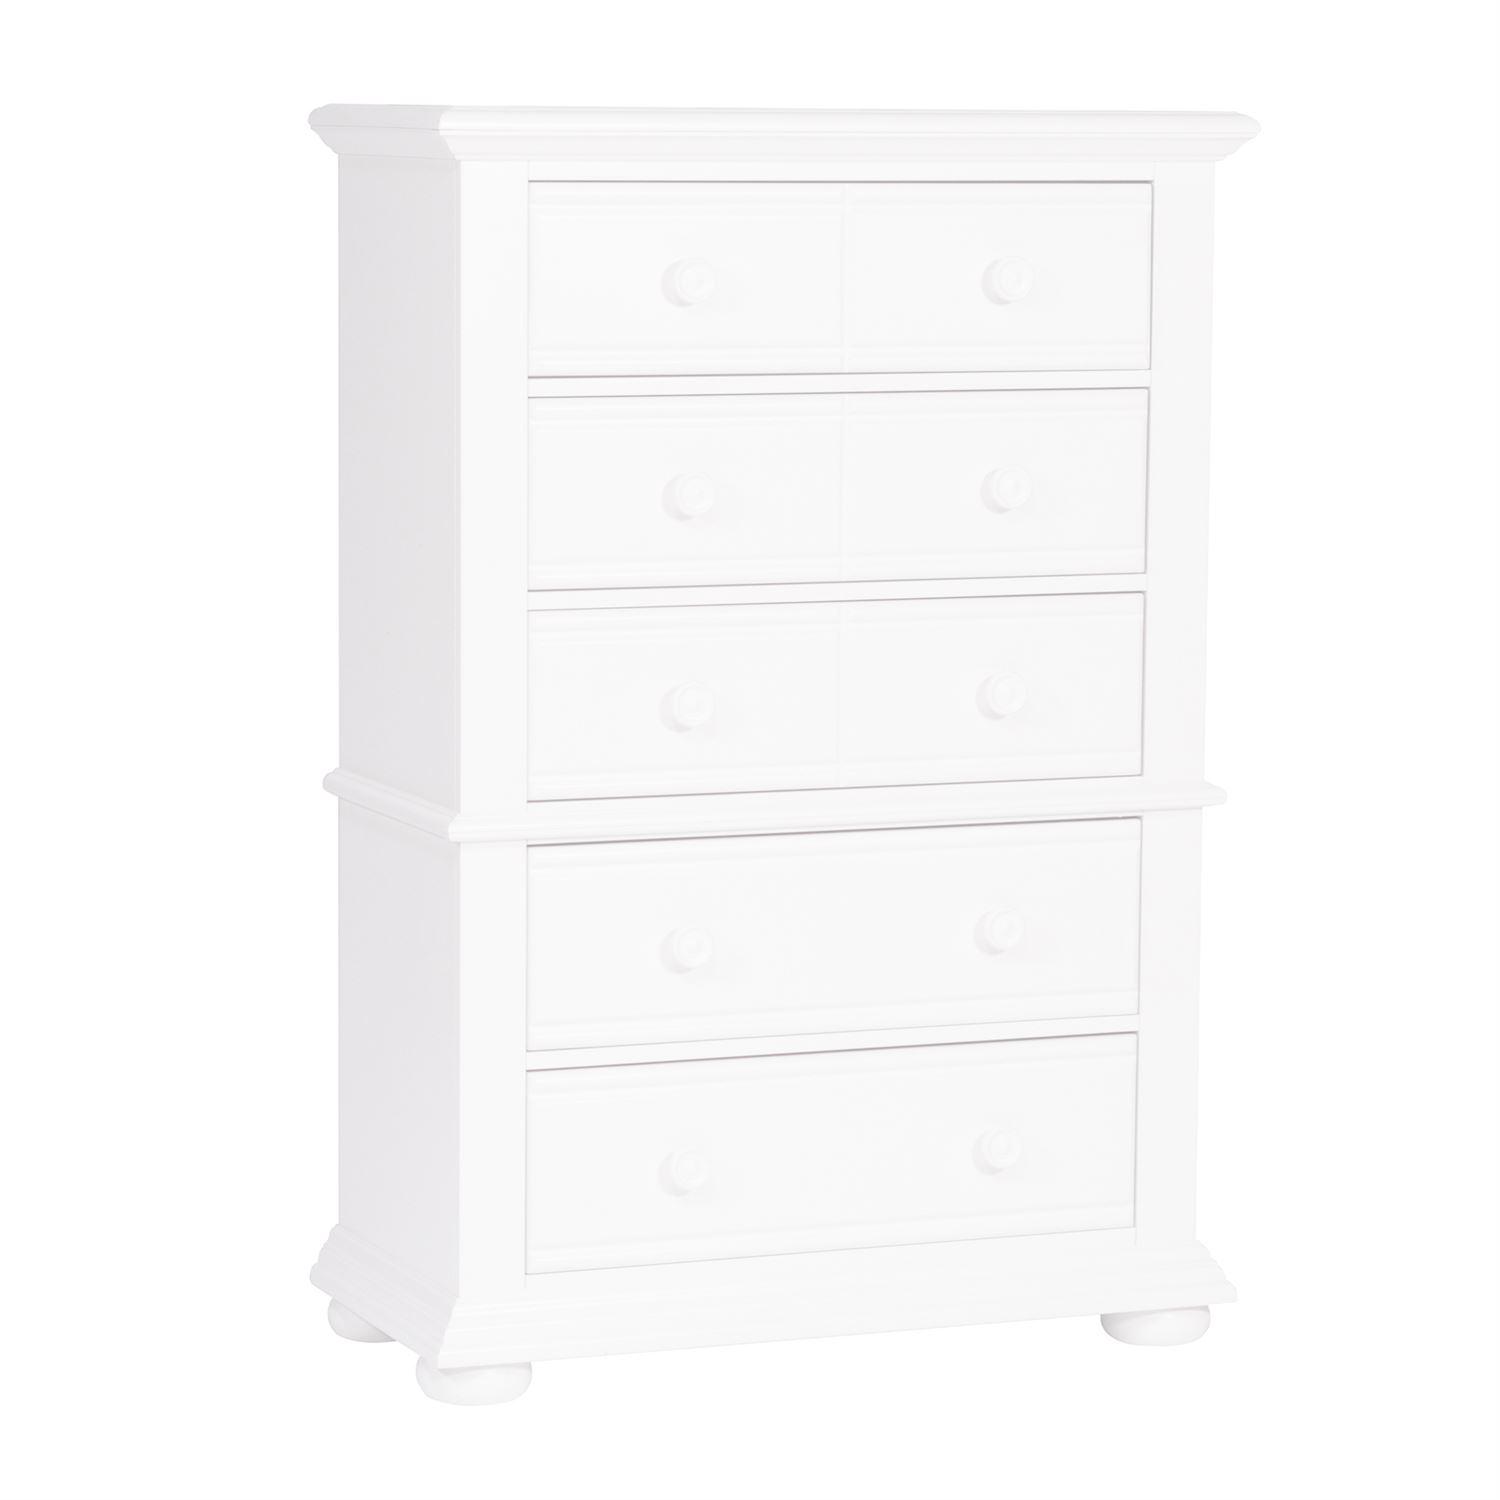 

    
Liberty Furniture Summer House I  (607-BR) Bachelor Chest Bachelor Chest White 607-BR41
